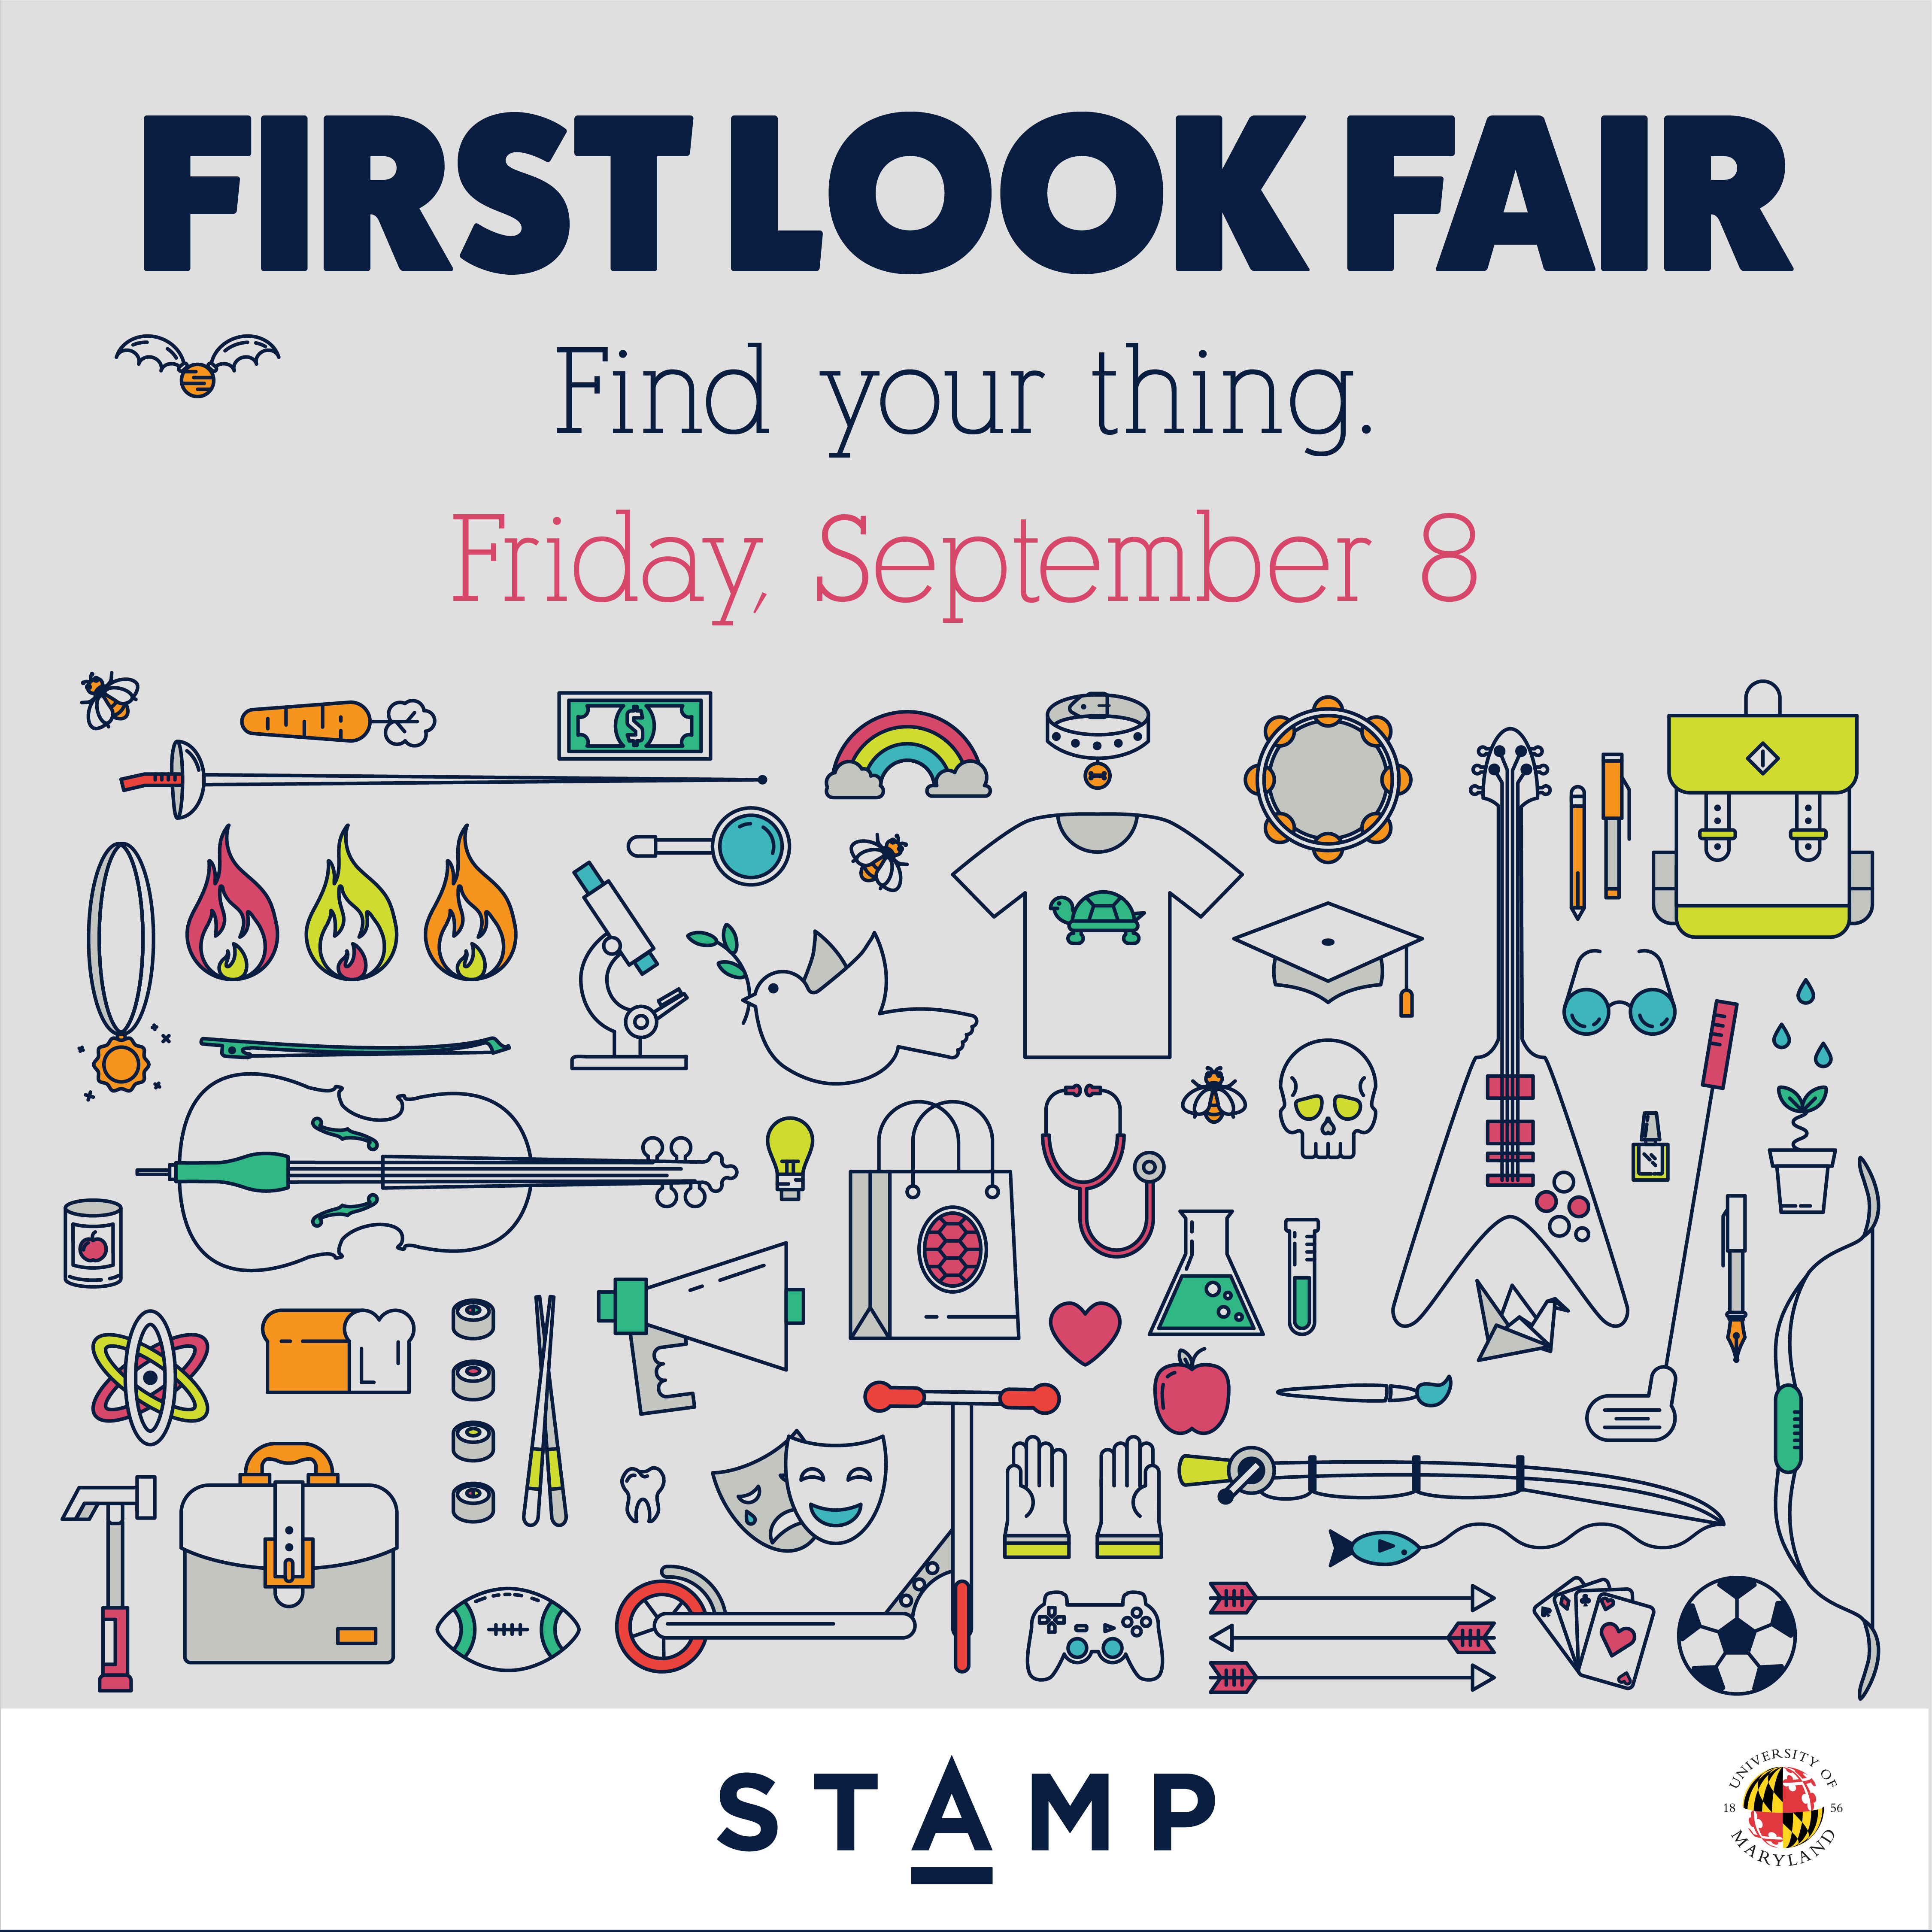 First Look Fair 2023 - Find Your Thing on FRIDAY, September 8